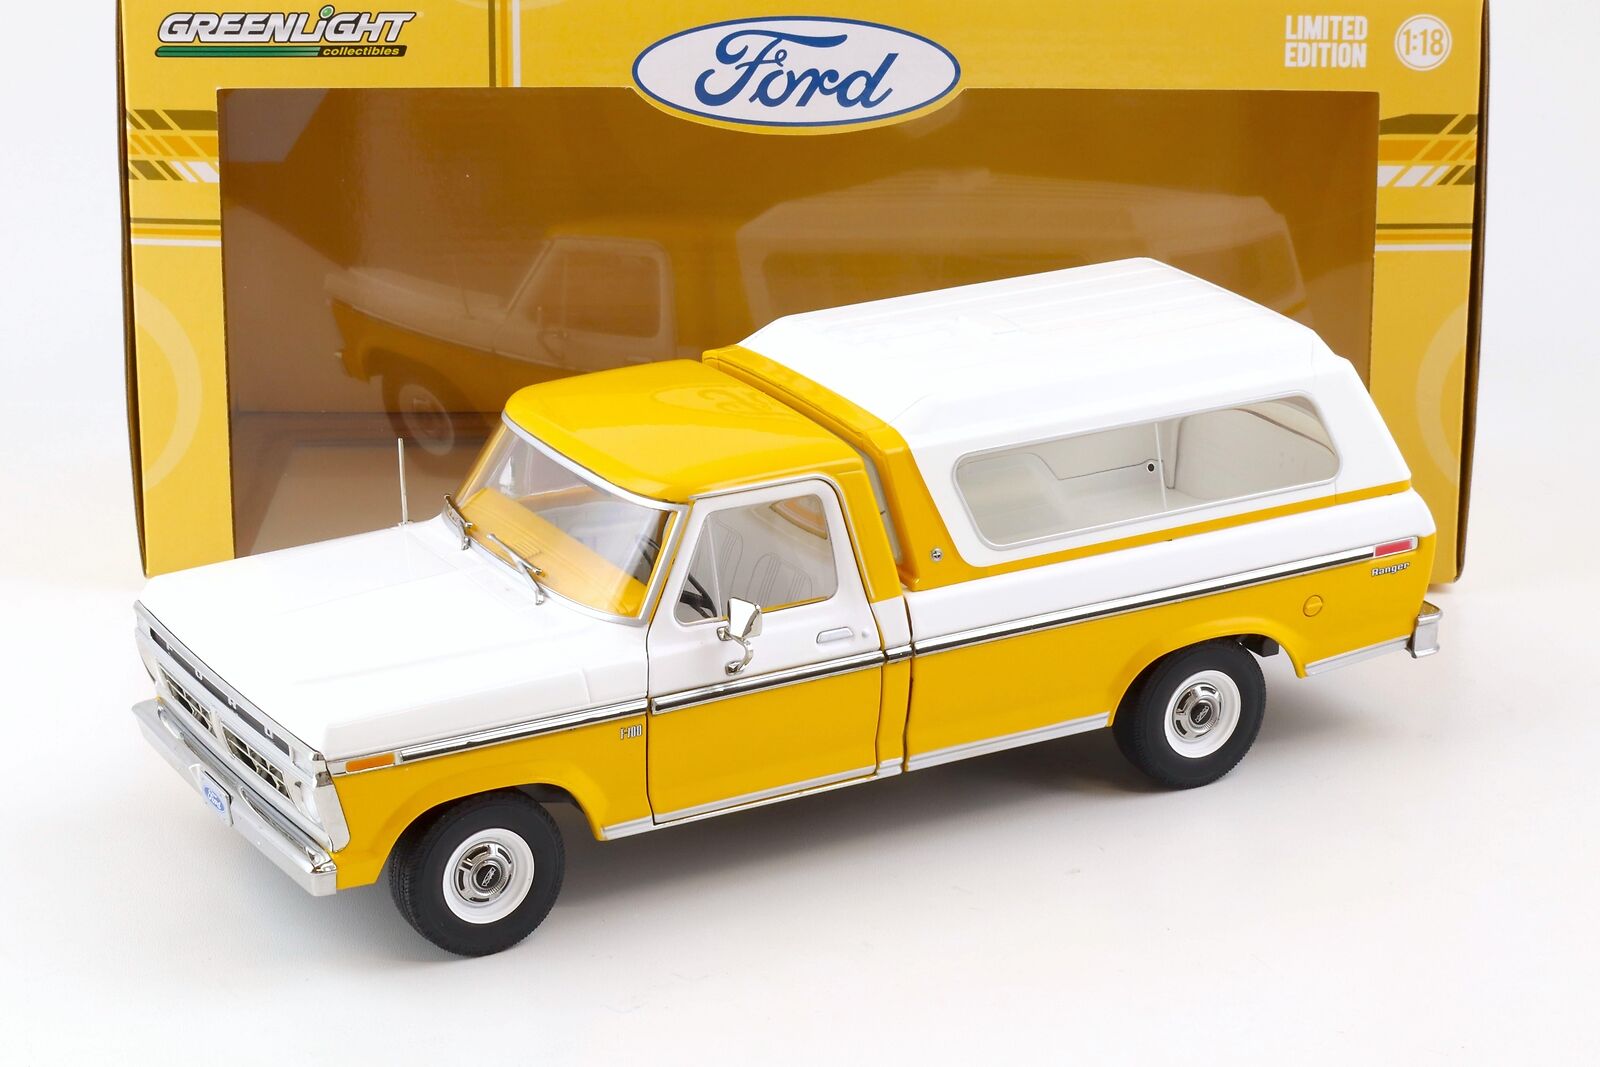 118 Greenlight 1976 Ford F-100 Pick Up with removable Hardtop white yellow